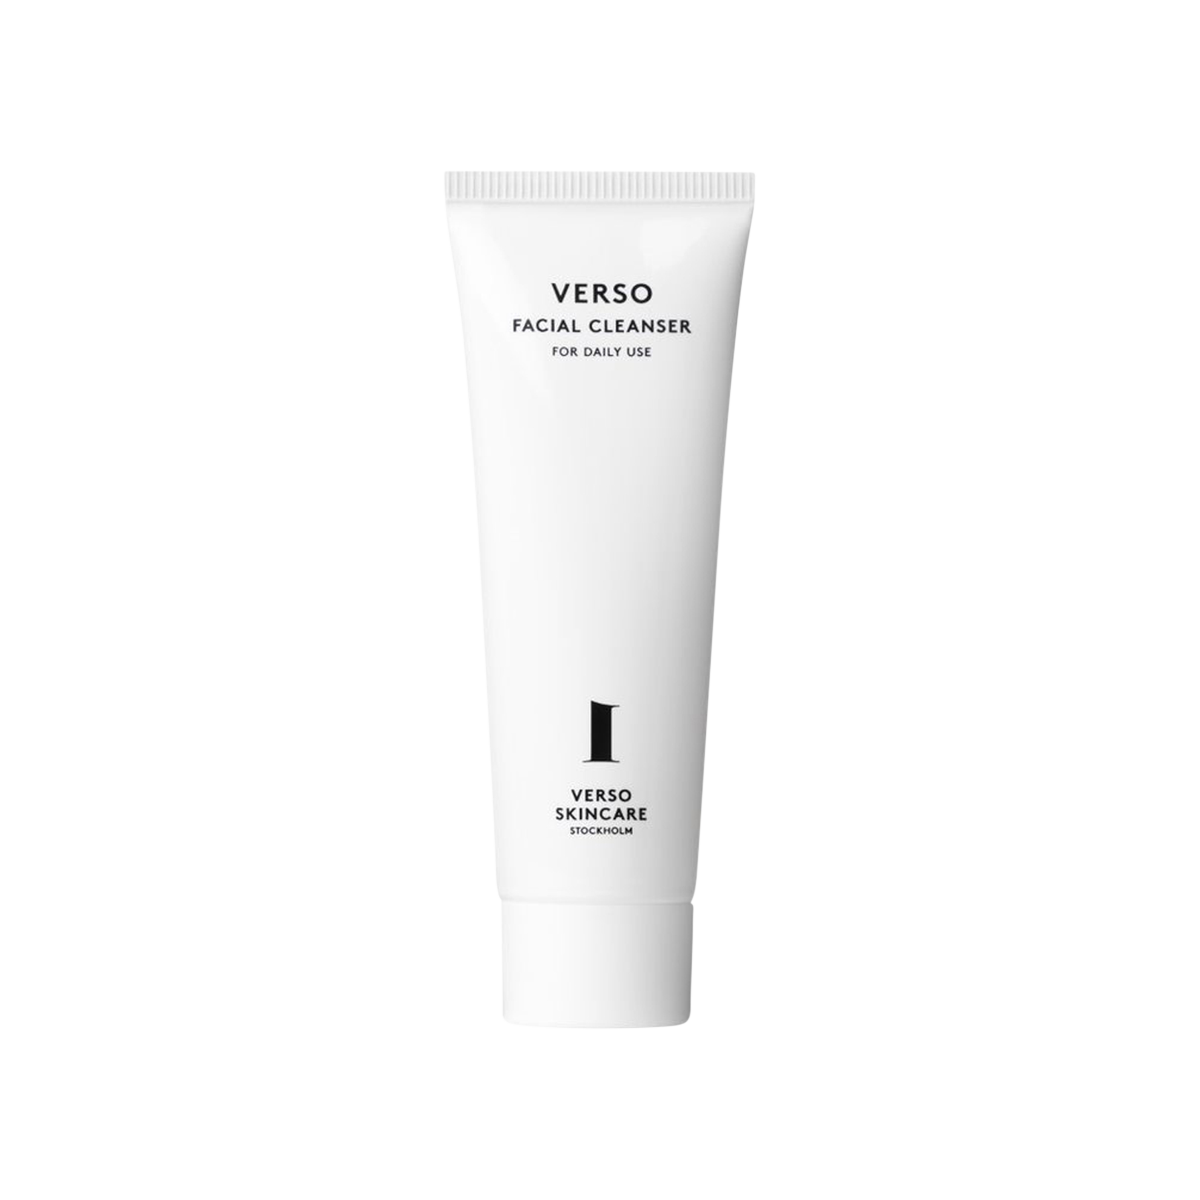 Verso - Facial Cleanser for daily use